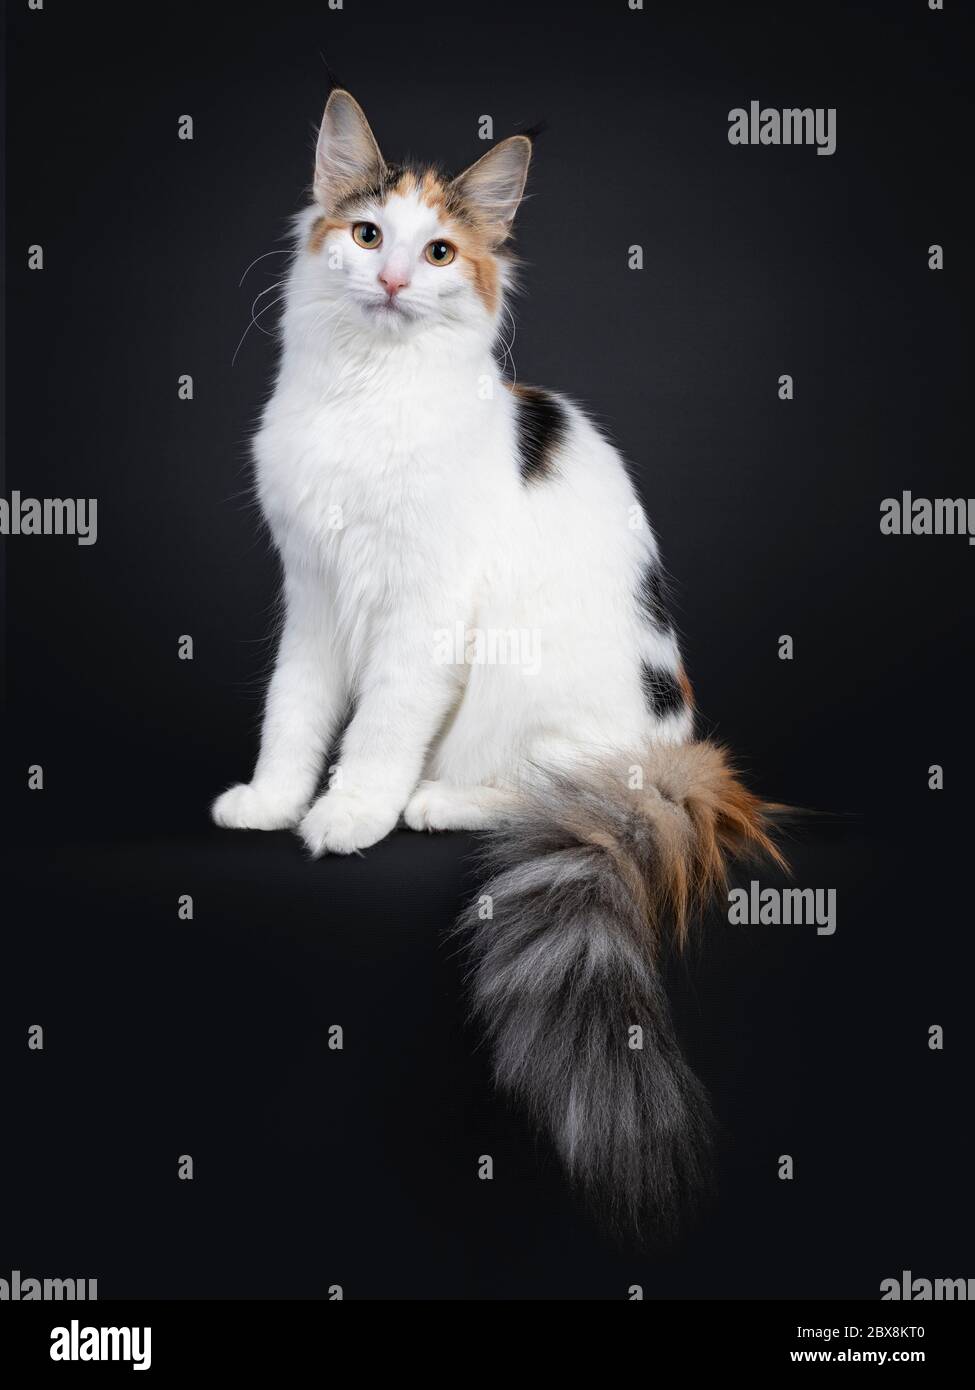 Cute young Norwegian Forestcat cat, sitting side ways with tail hanging down over edge. Looking straight at lens. Isolated on black background. Stock Photo